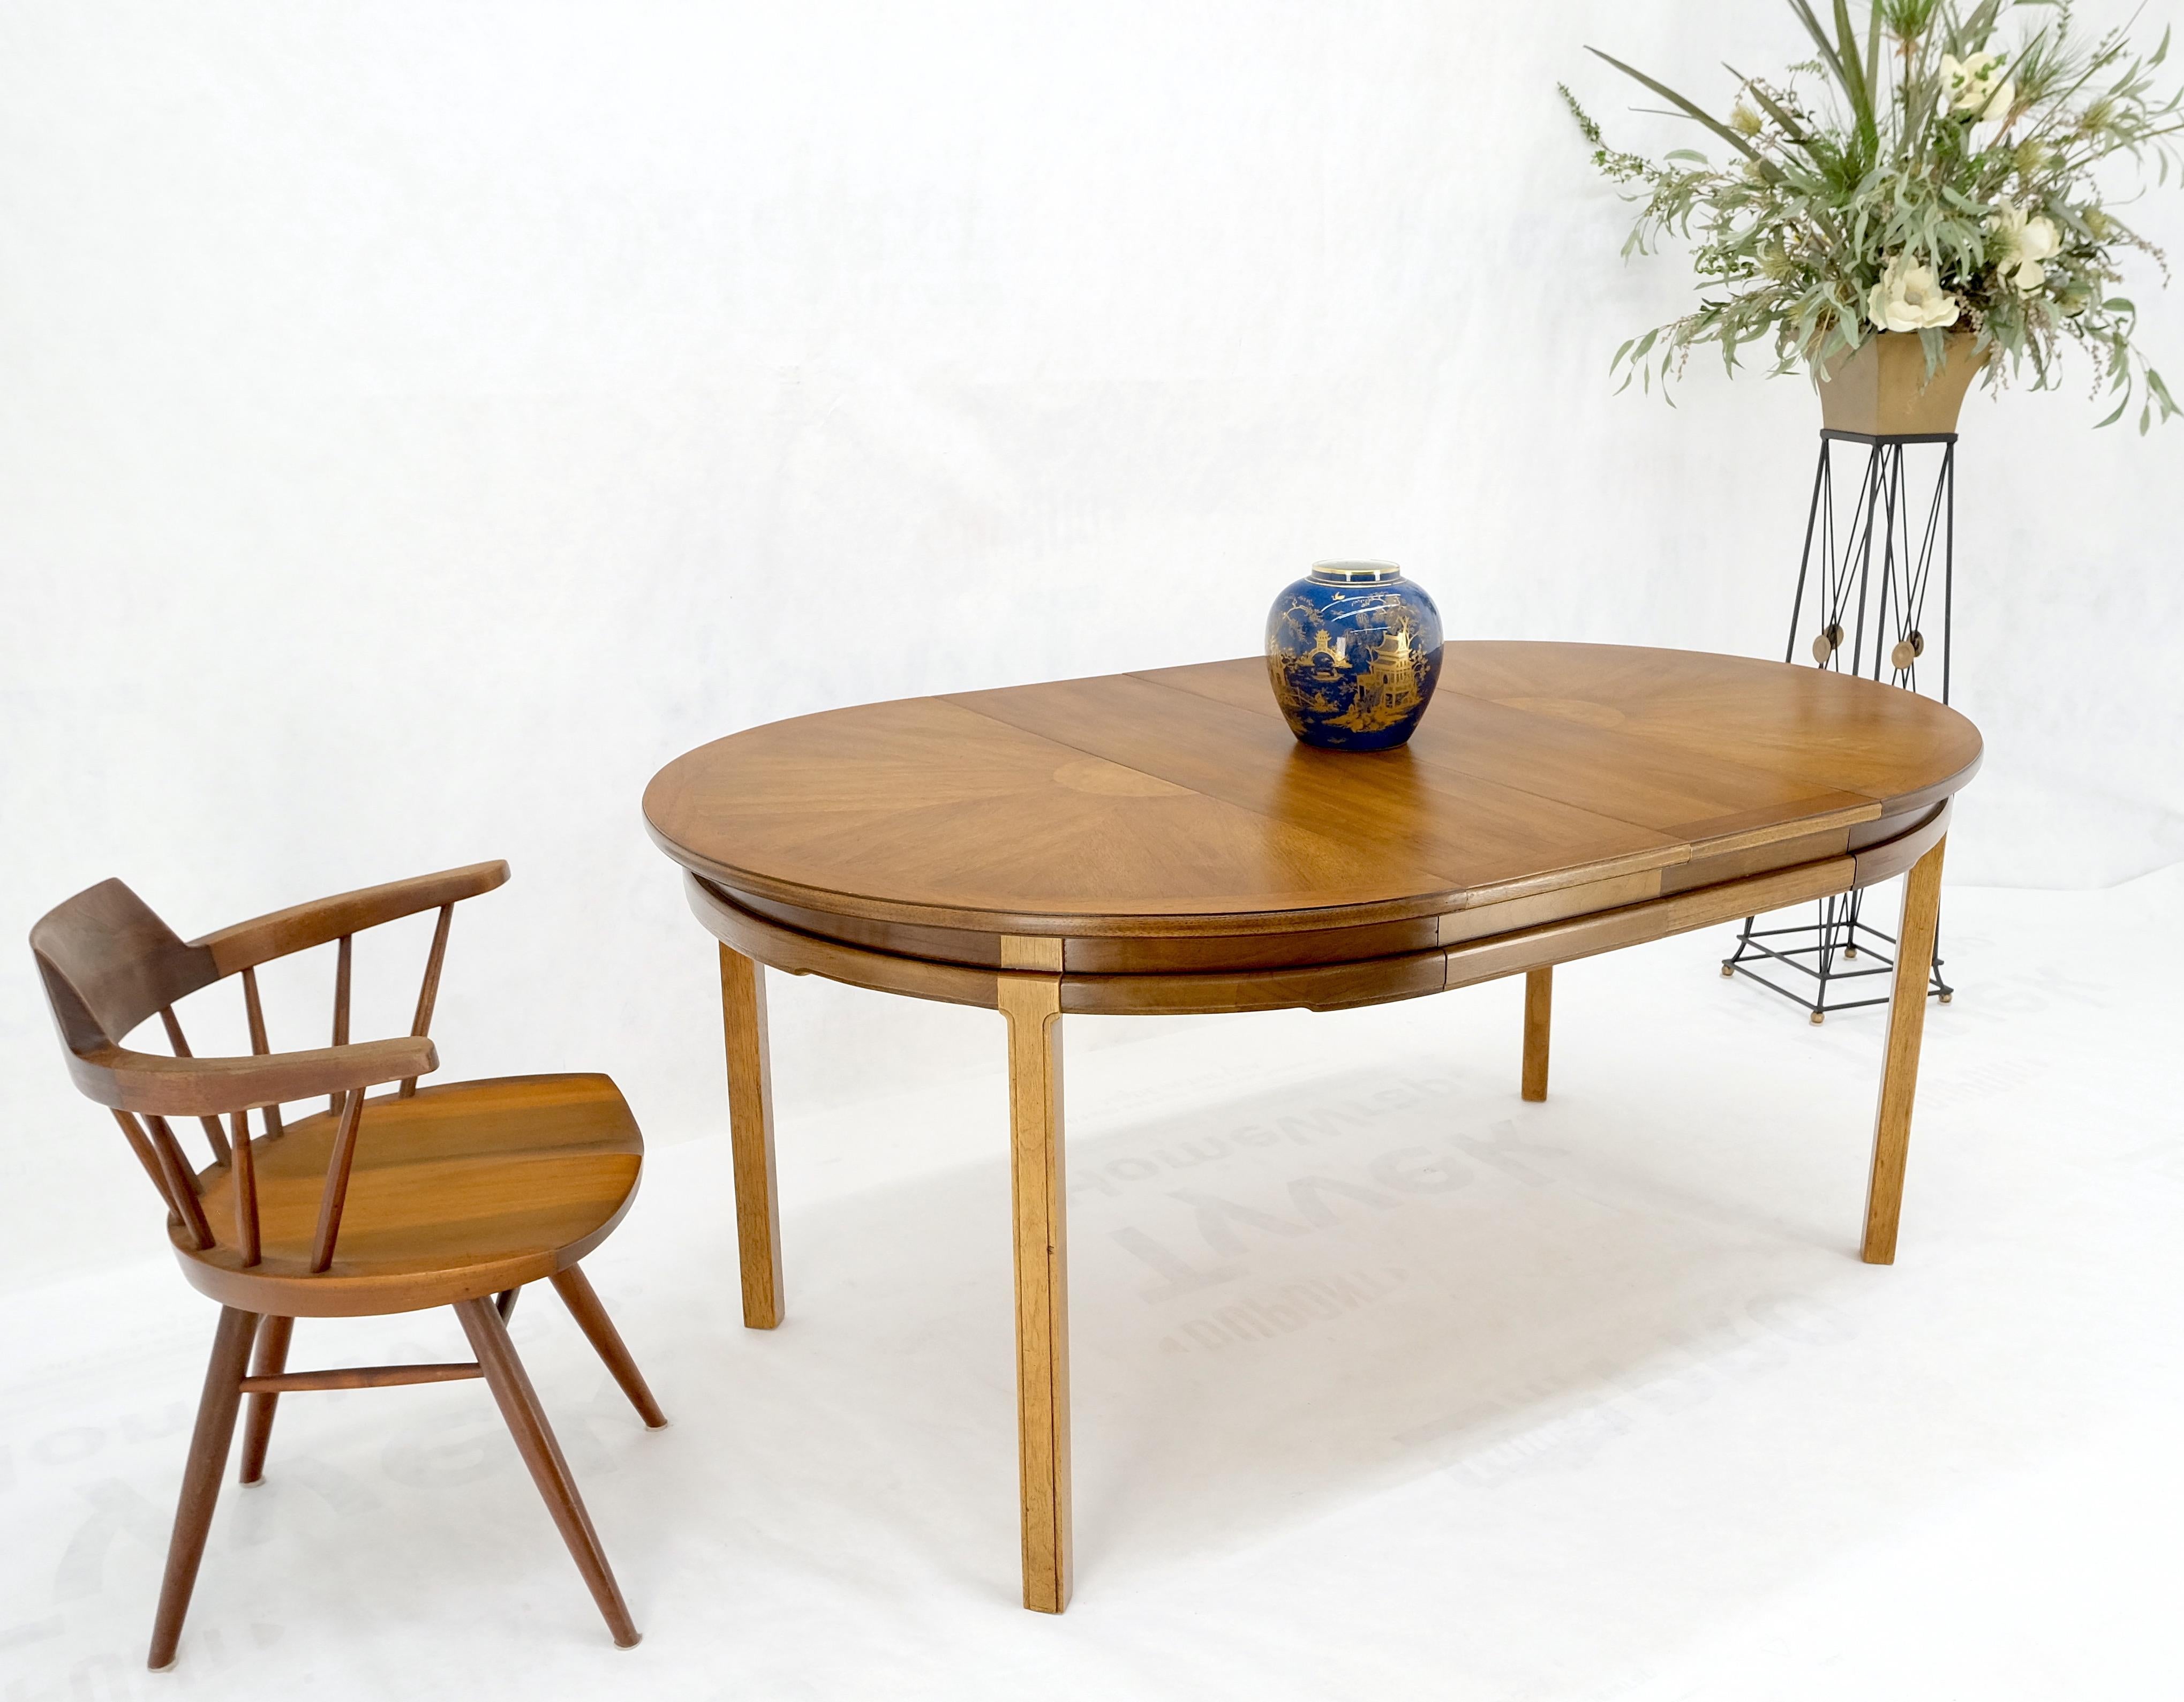 Round Sunburst Pattern Mid-Century Modern Dining Table with Two Leaves Mint For Sale 5